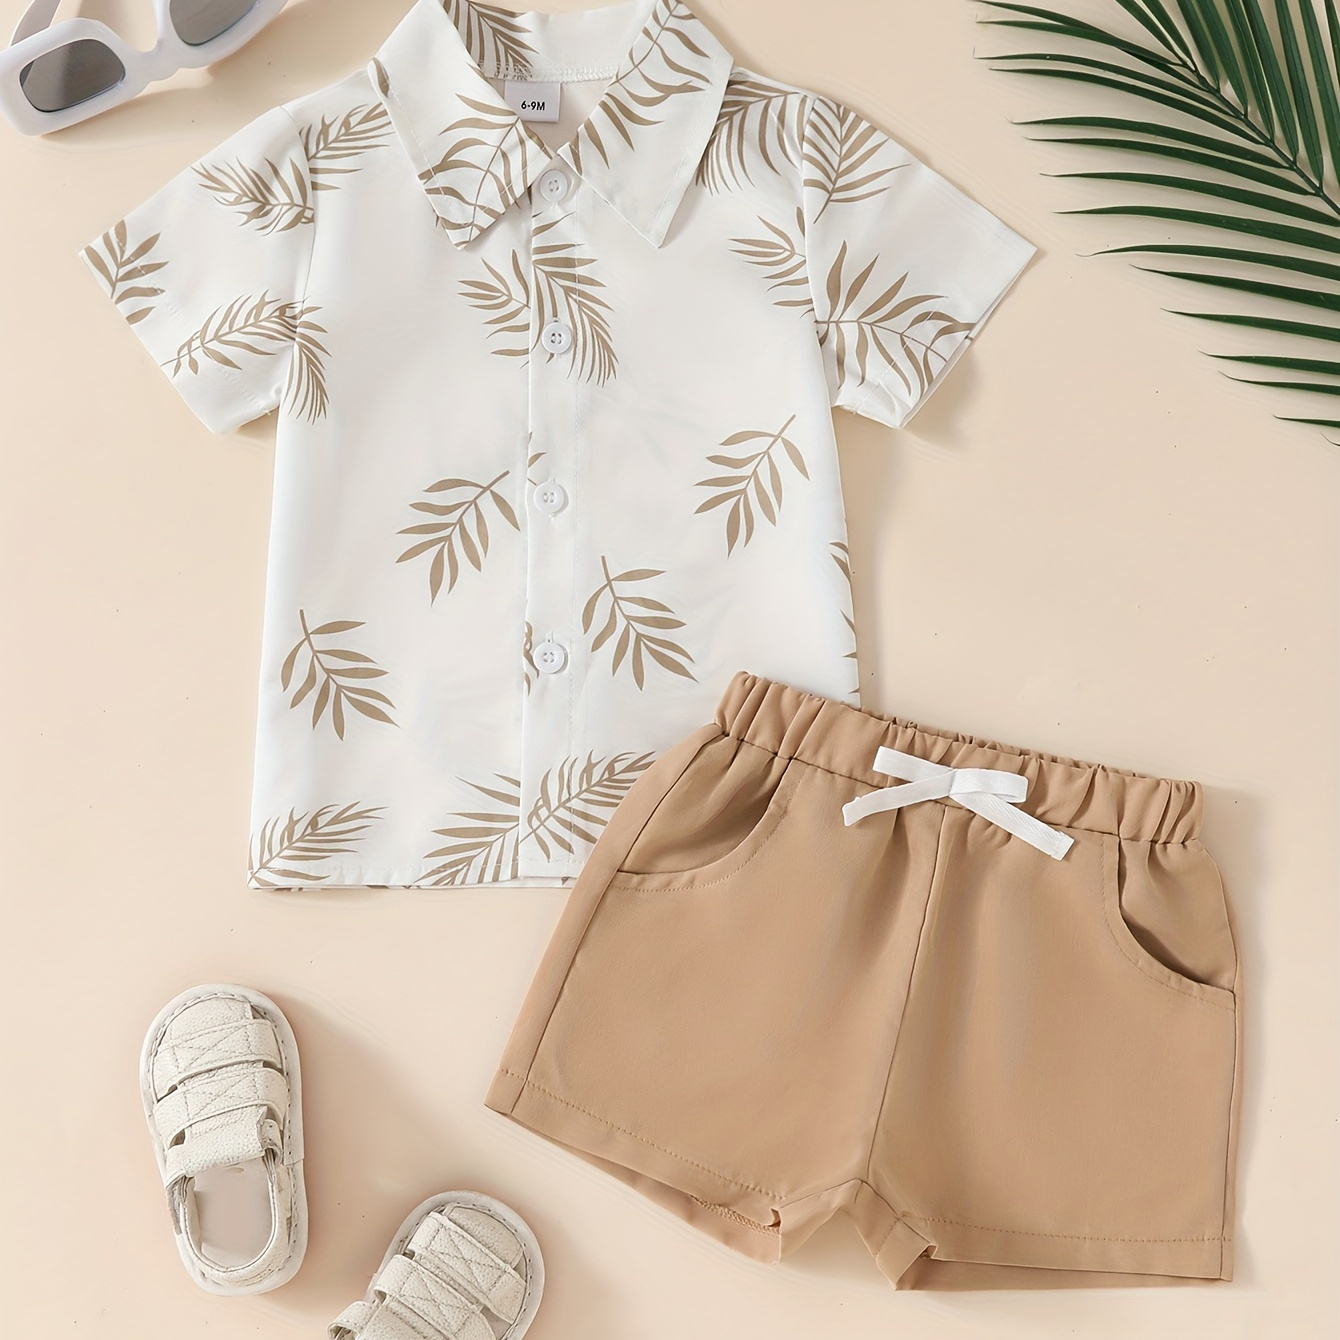 

Toddler Baby Boy's 2-piece Outfit, Casual Beach Vacation Style, Short Sleeve Shirt & Shorts Set, Tropical Leaf Print Summer Holiday Clothing